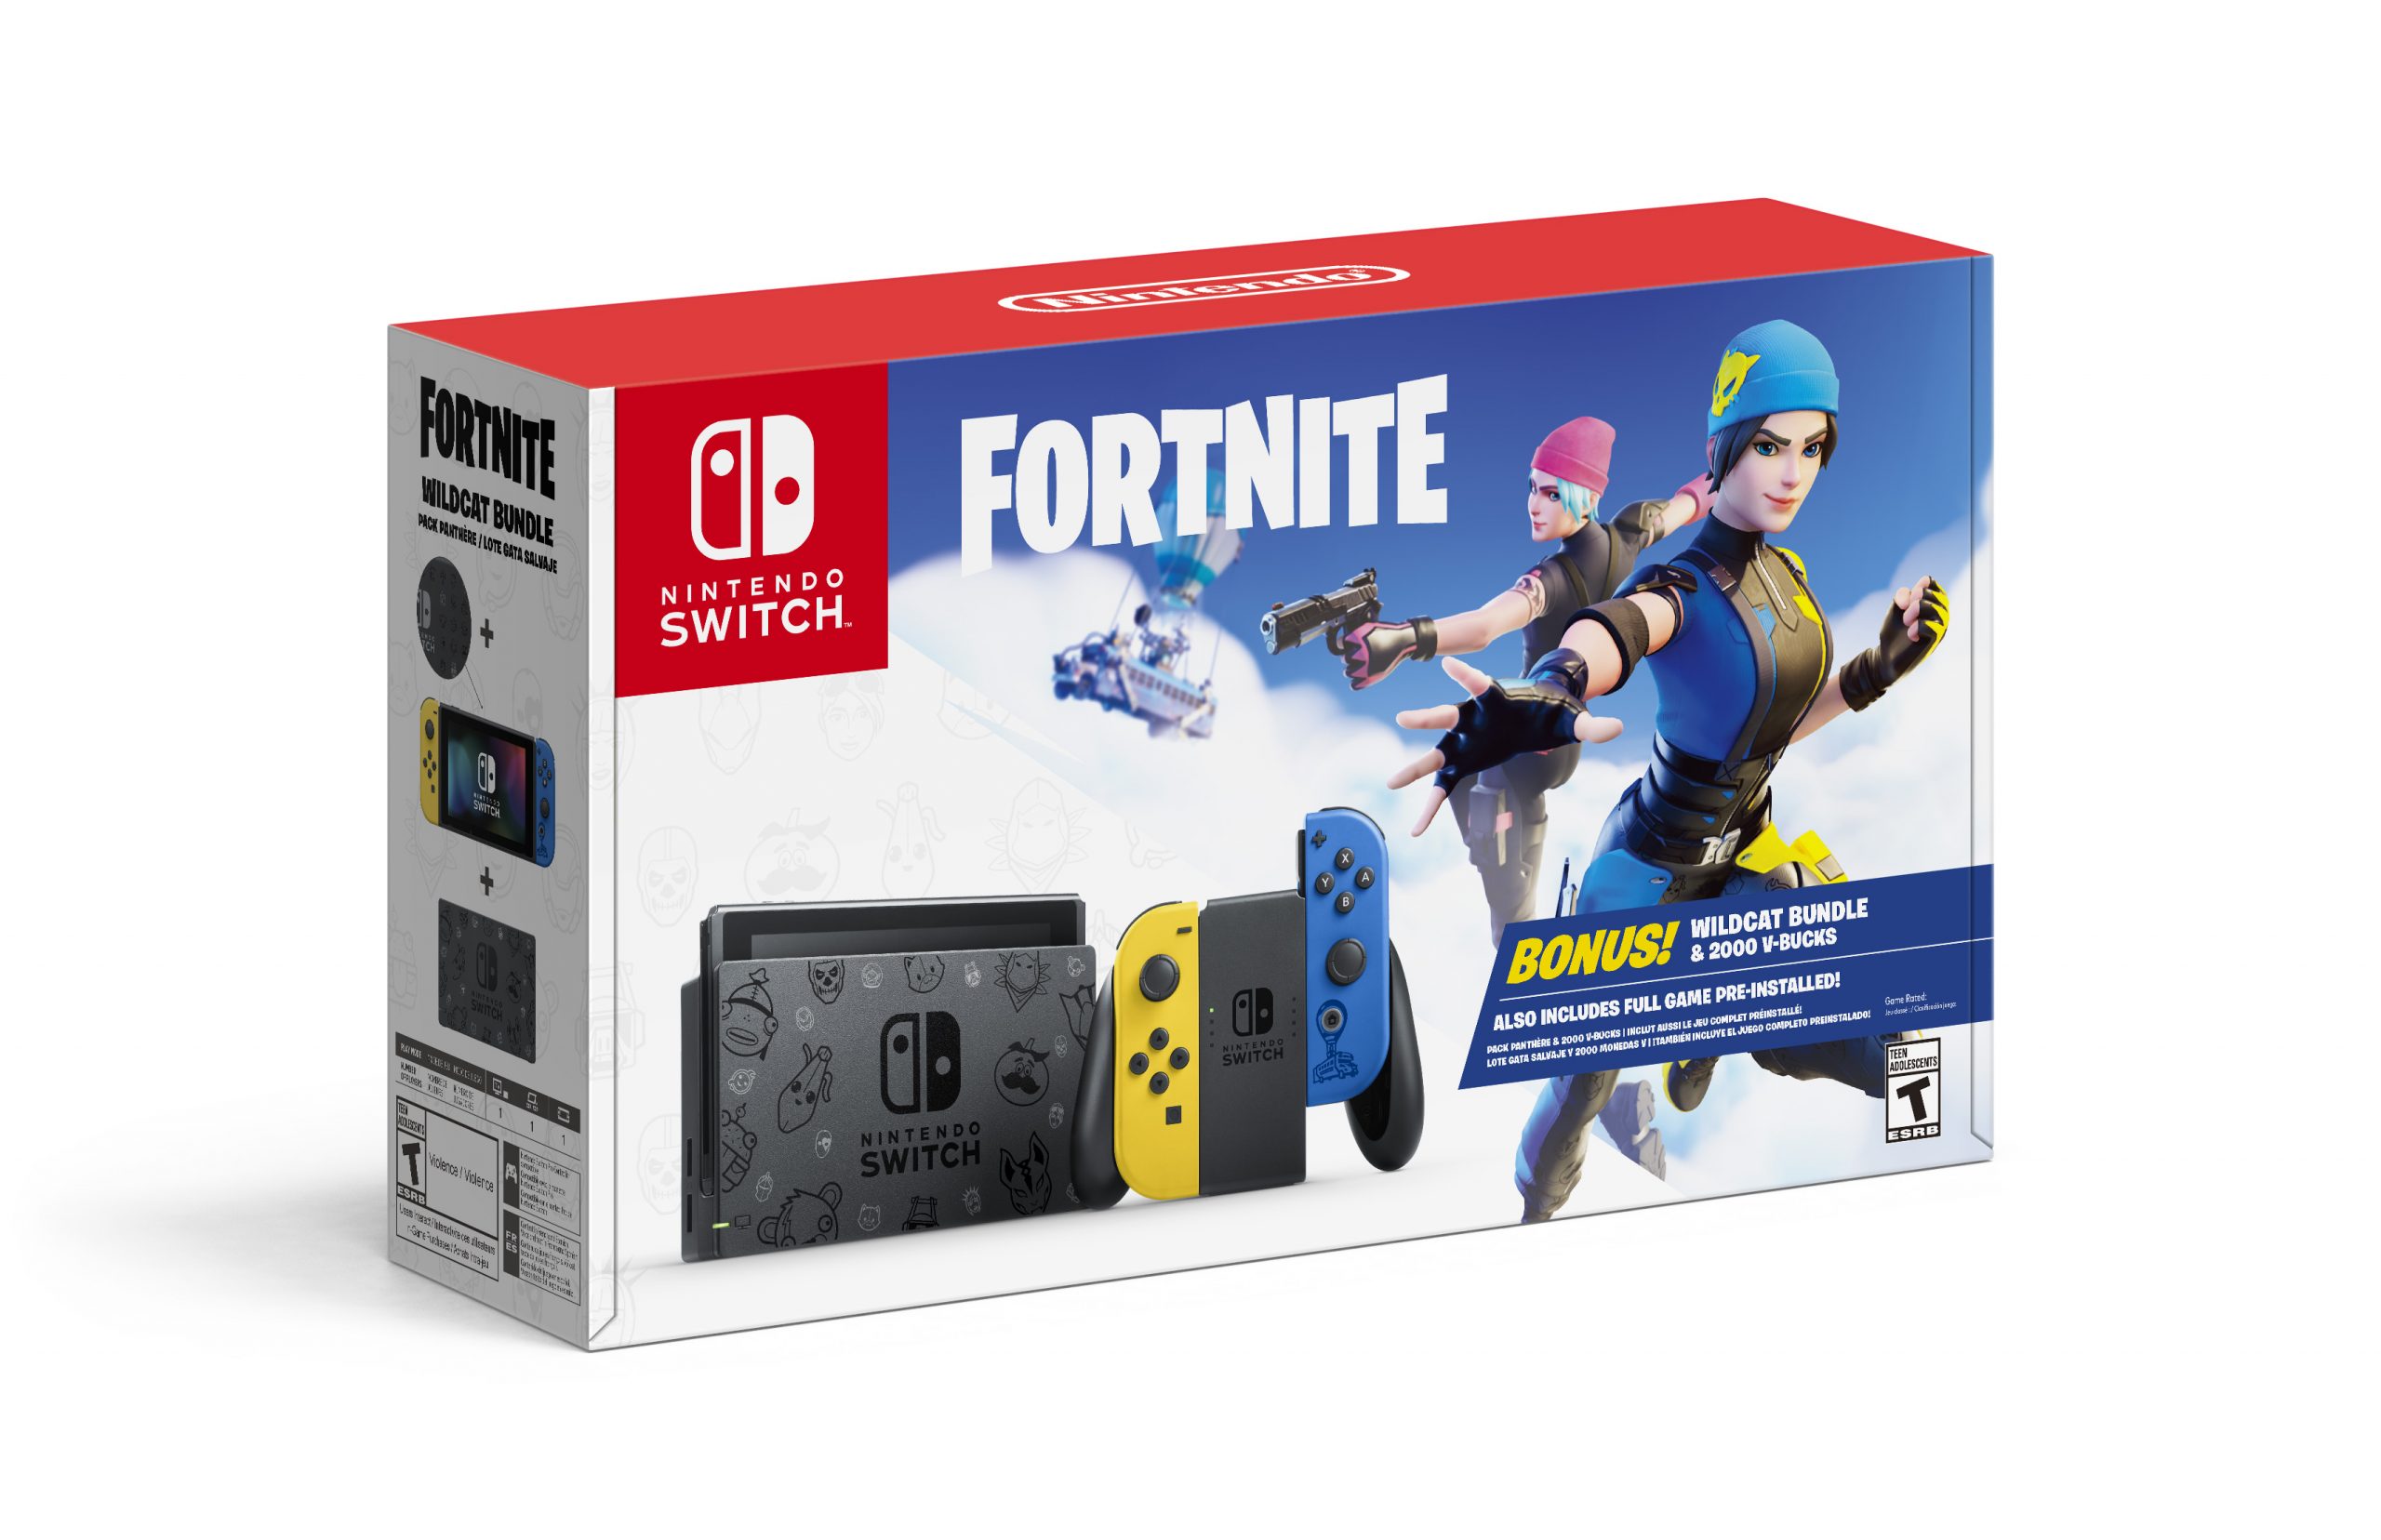 Nintendo Switch Fortnite Wildcat Bundle gets a US release for Cyber Monday